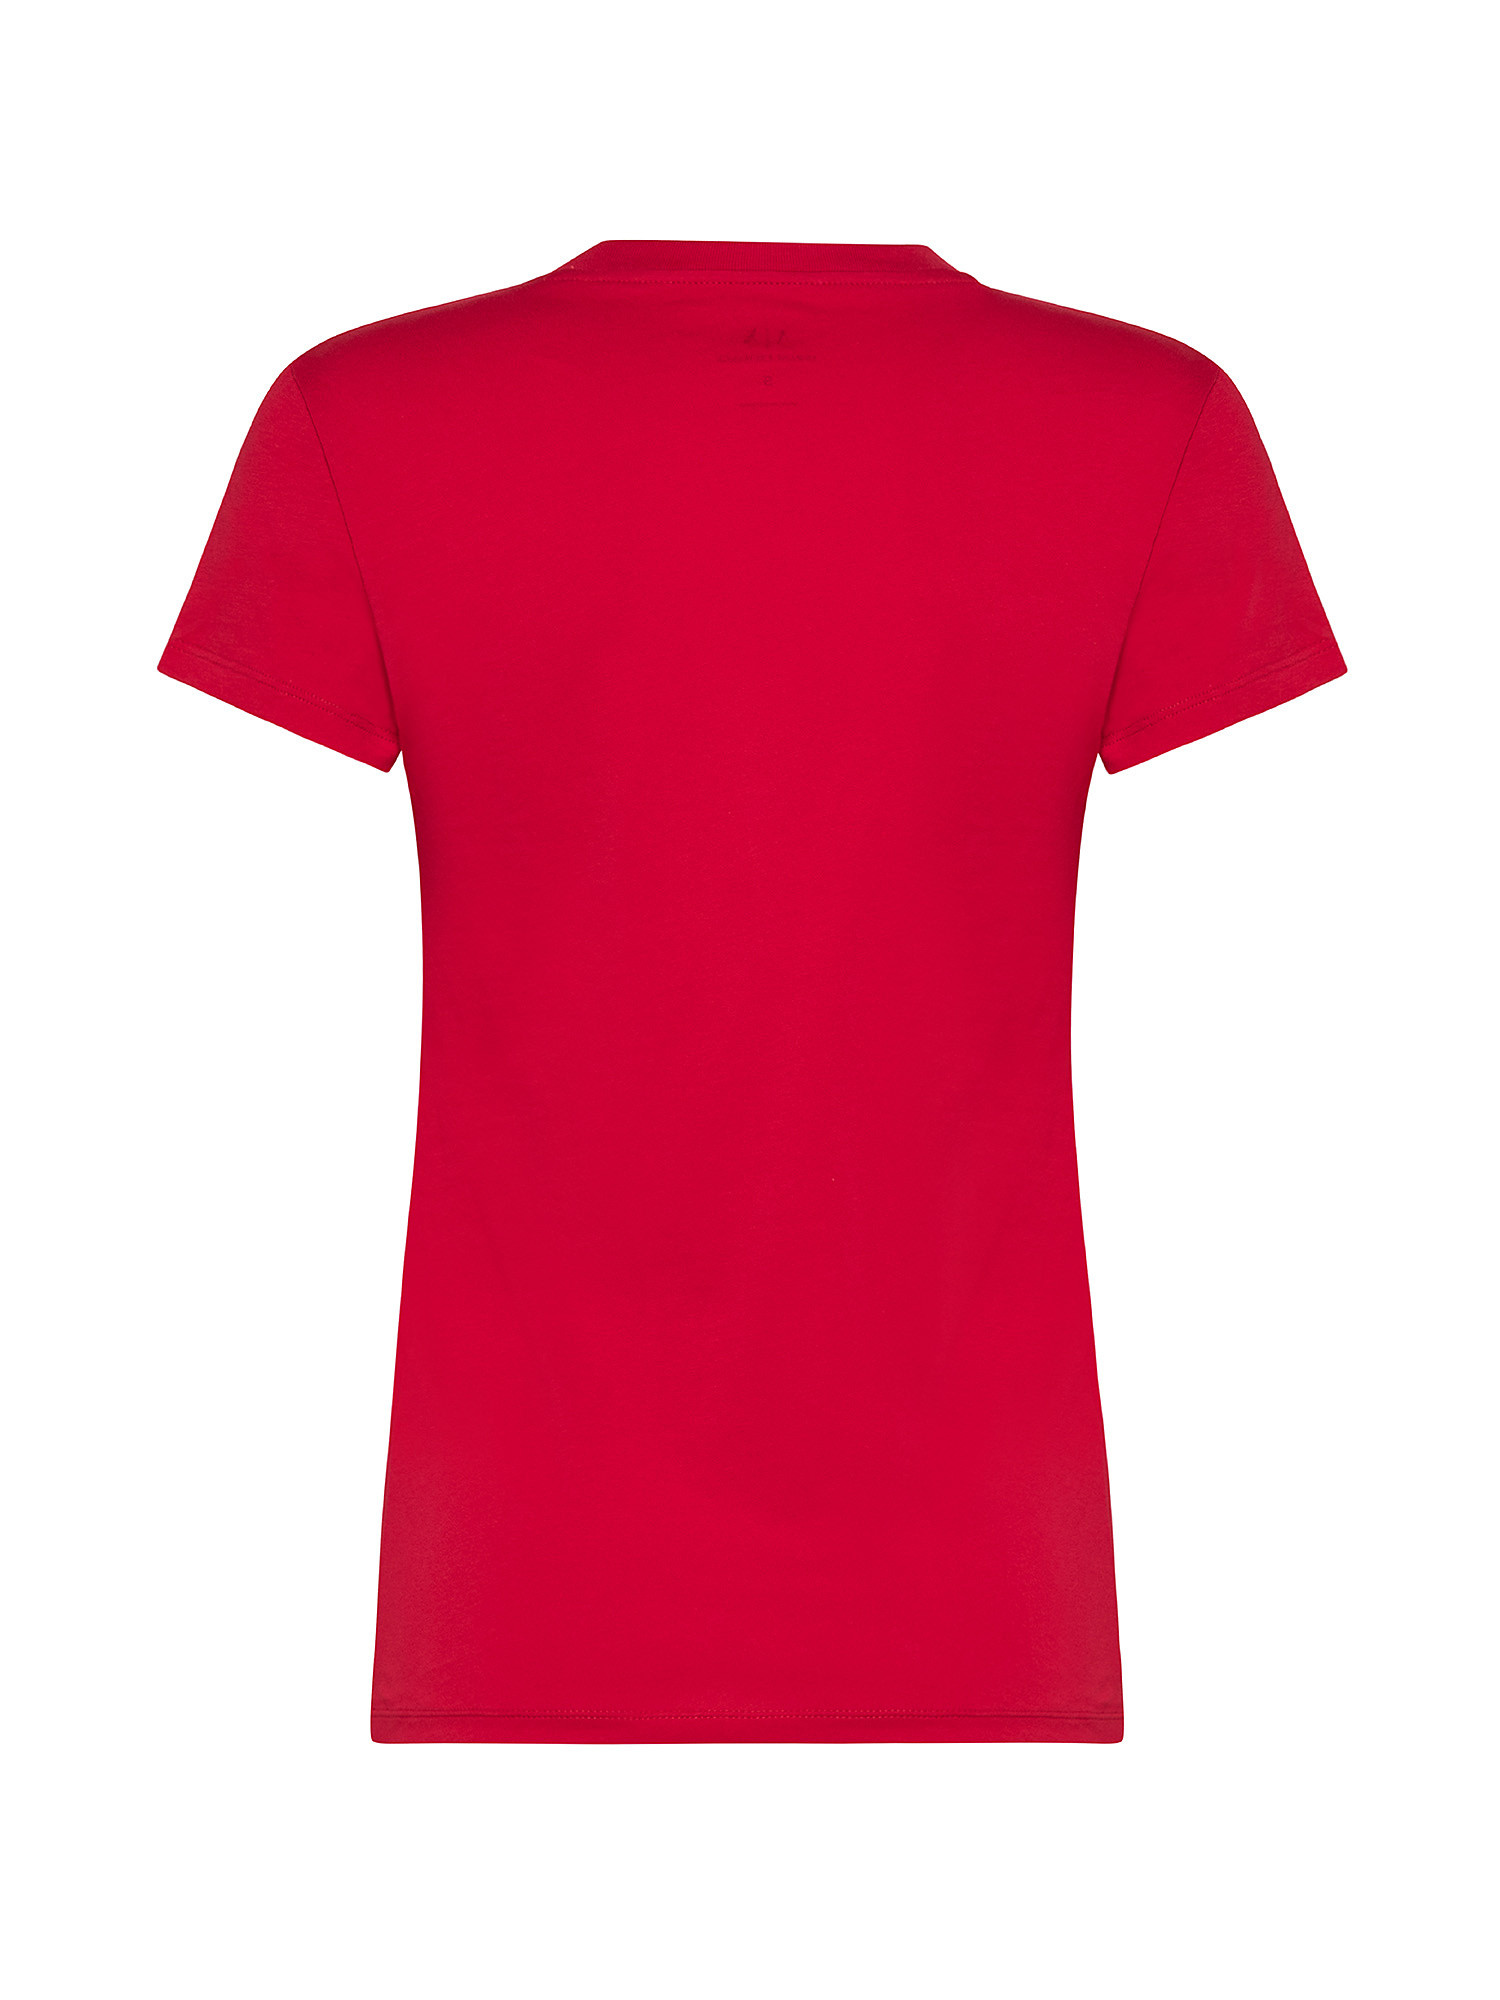 T-shirt, Rosso, large